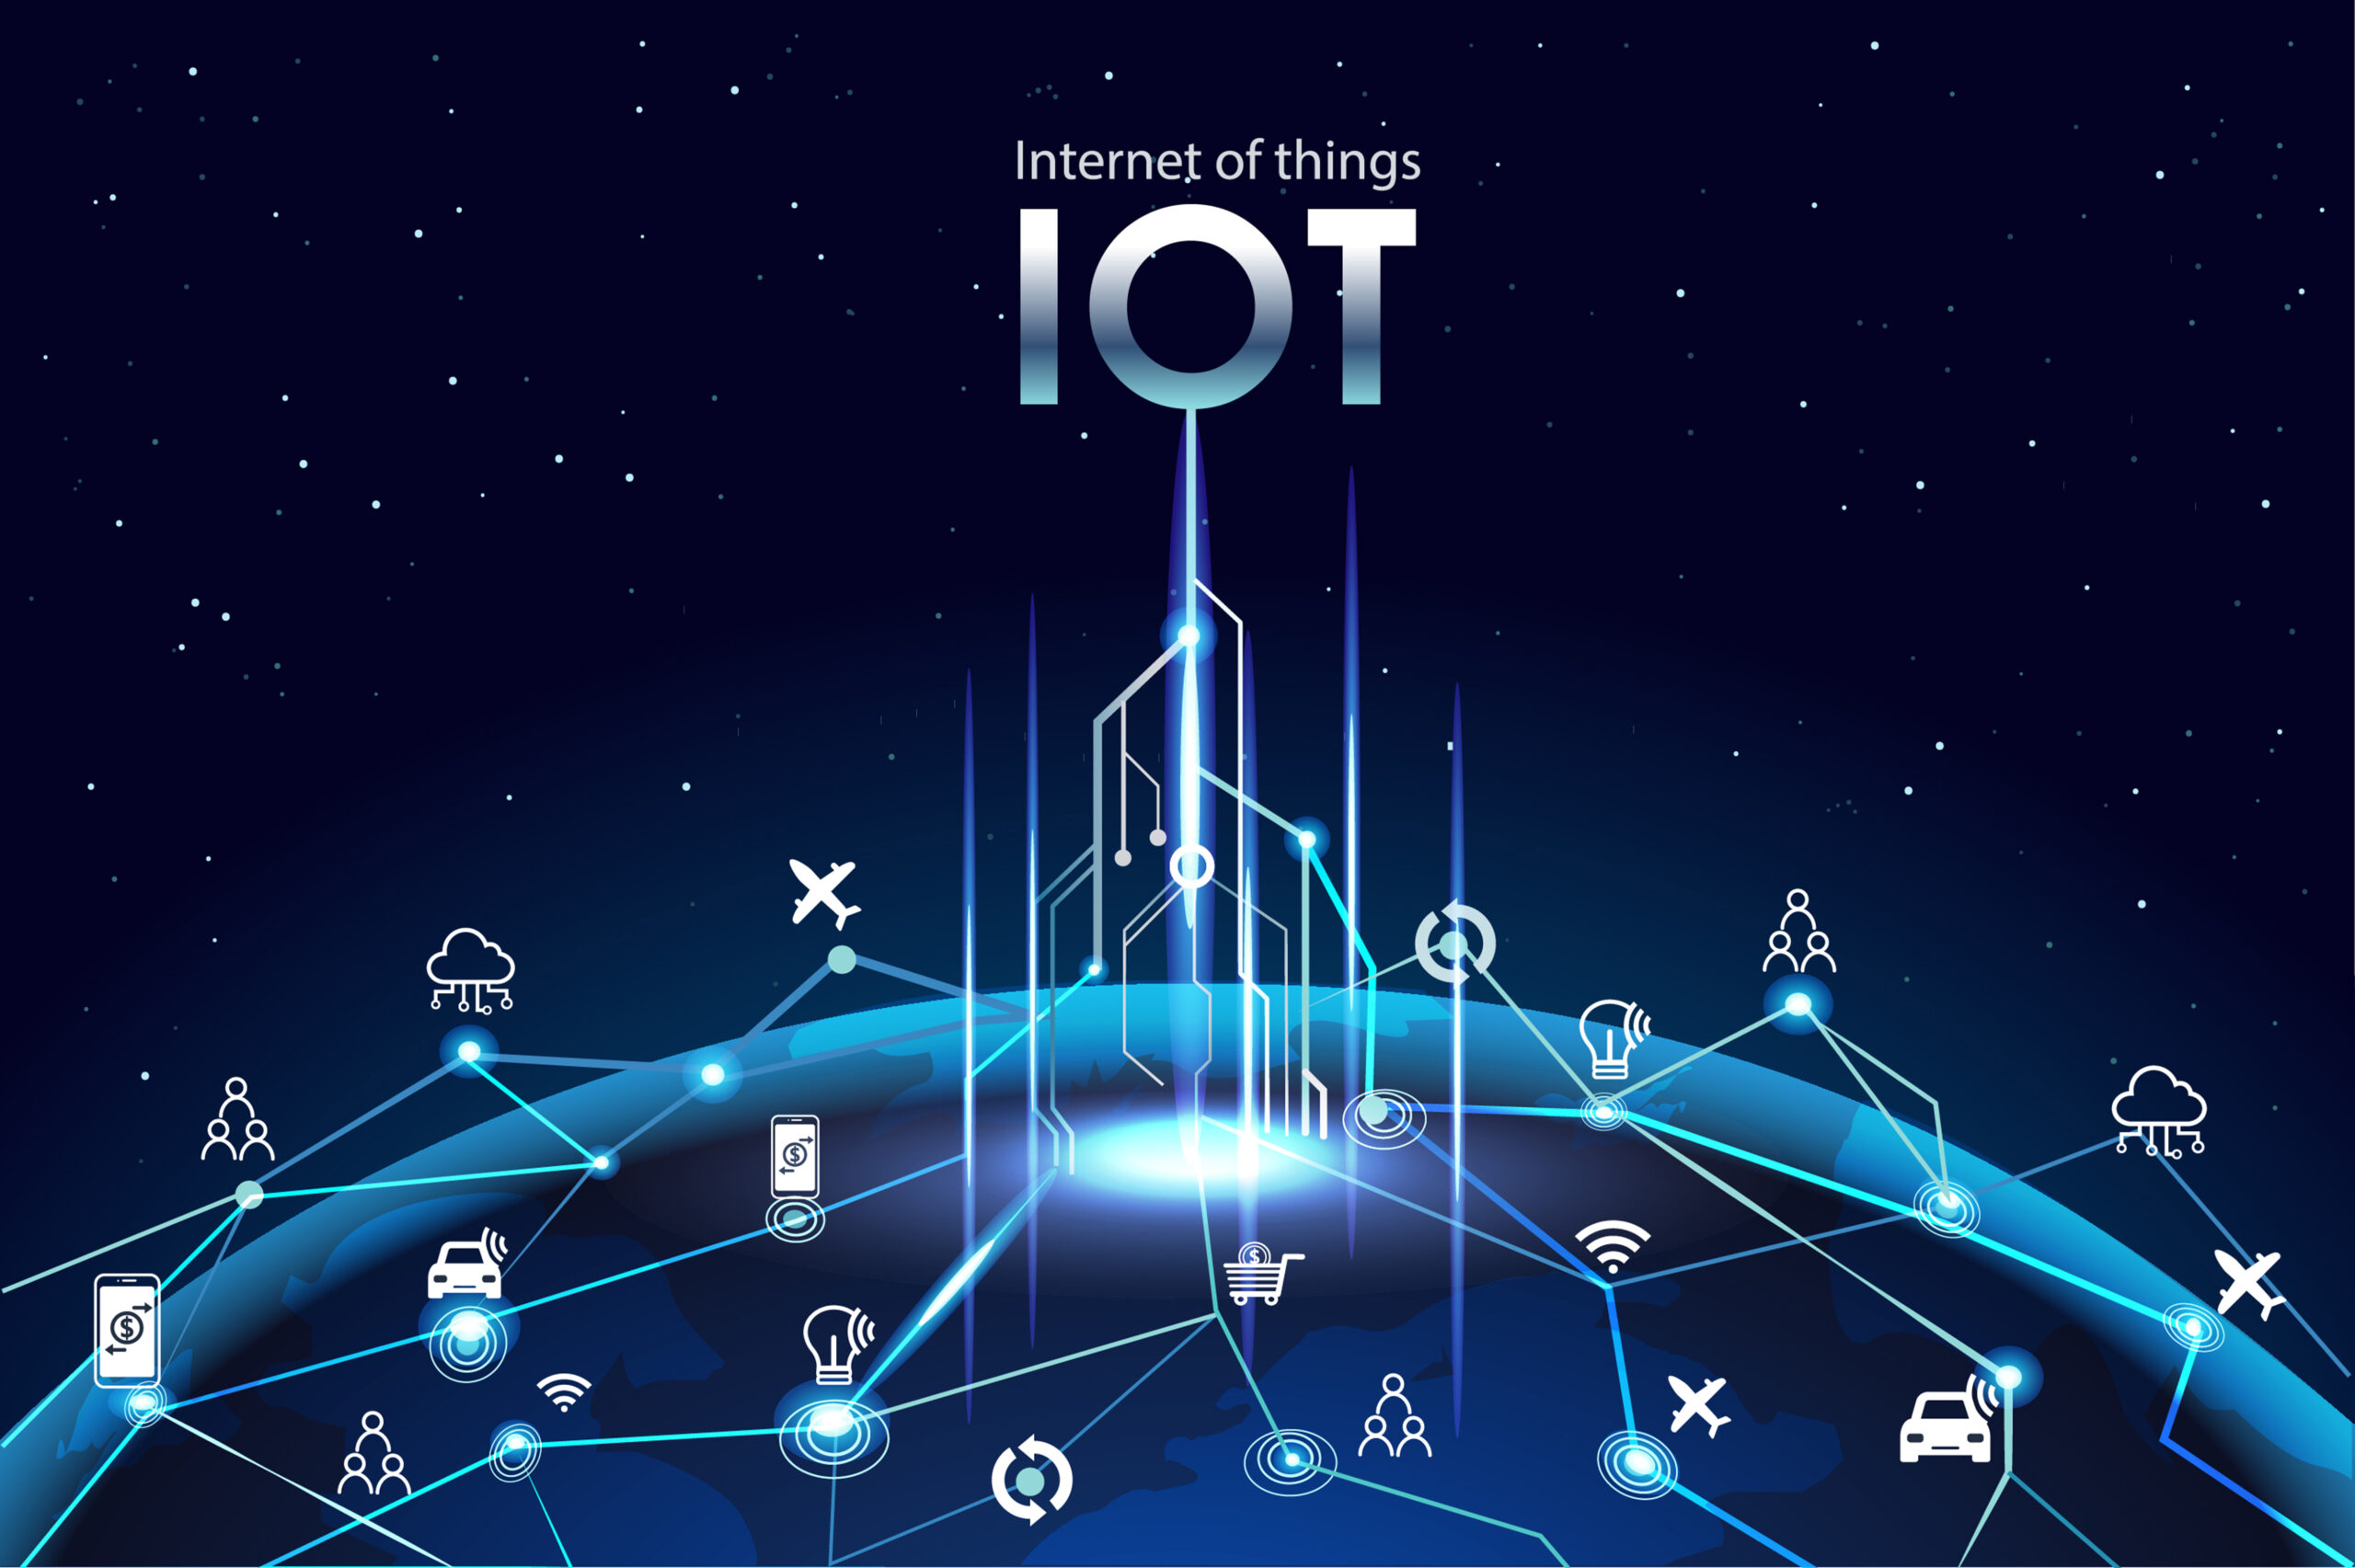 Learn How to Implement Internet of Things (IoT) Solution in a 2-day BootCamp